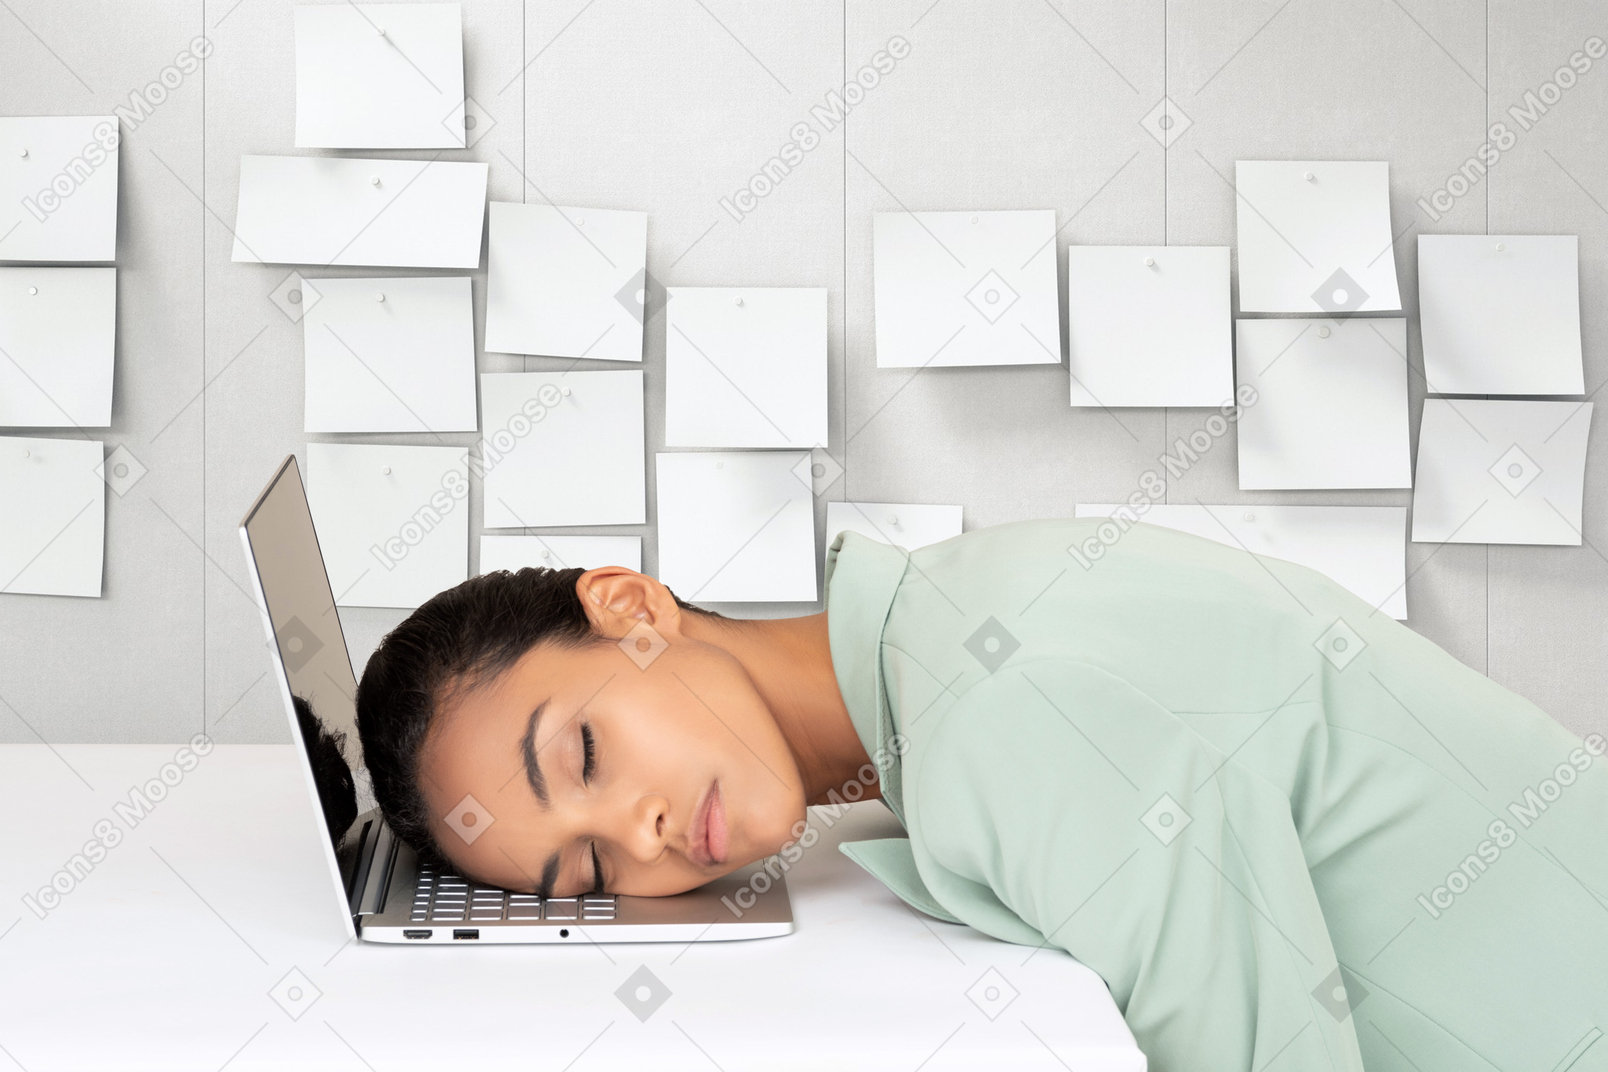 A woman is sleeping on a laptop computer